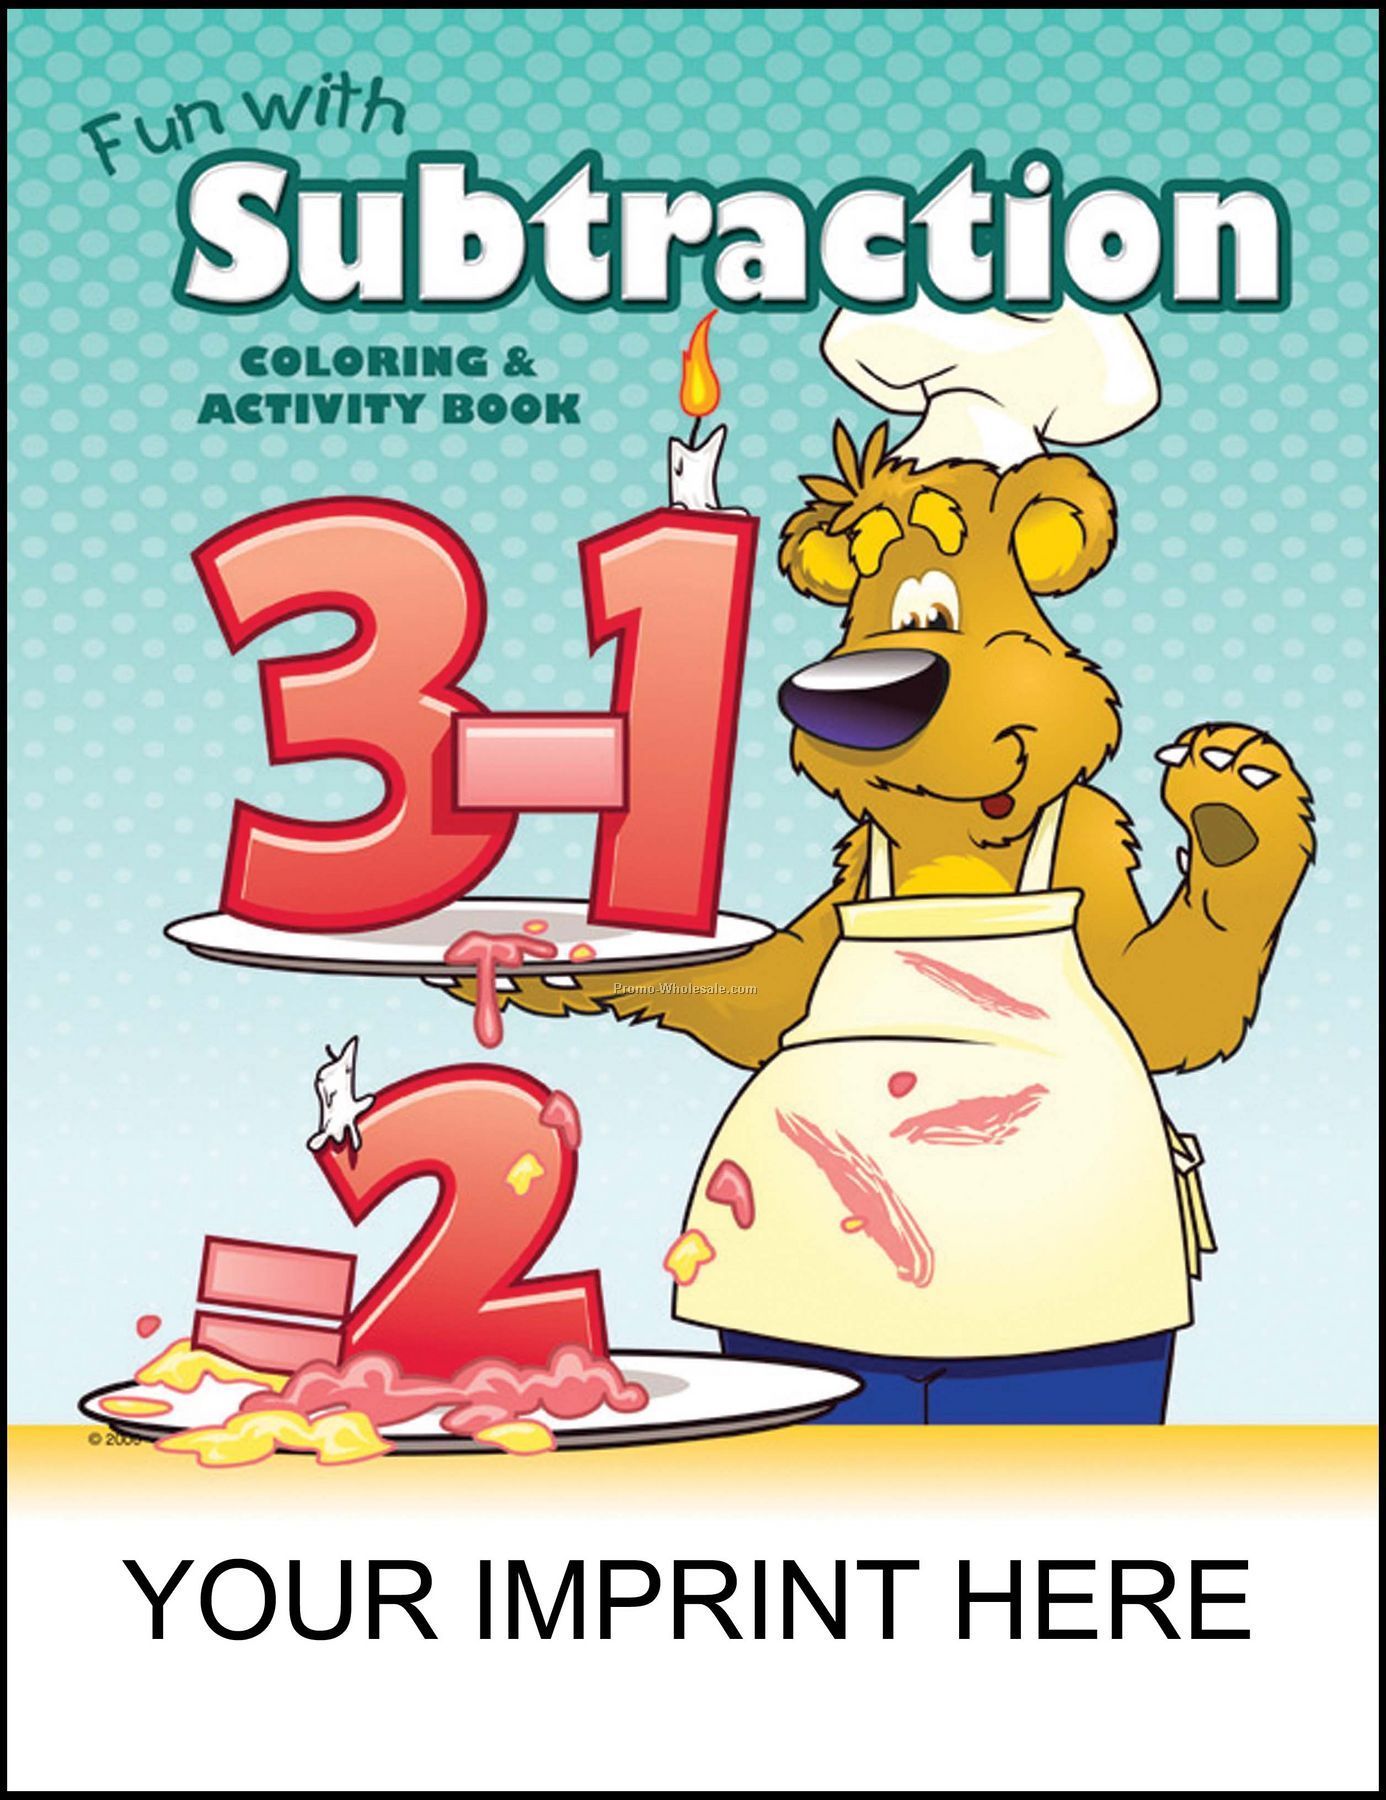 8-3/8"x10-7/8" Fun With Subtraction Coloring & Activity Book